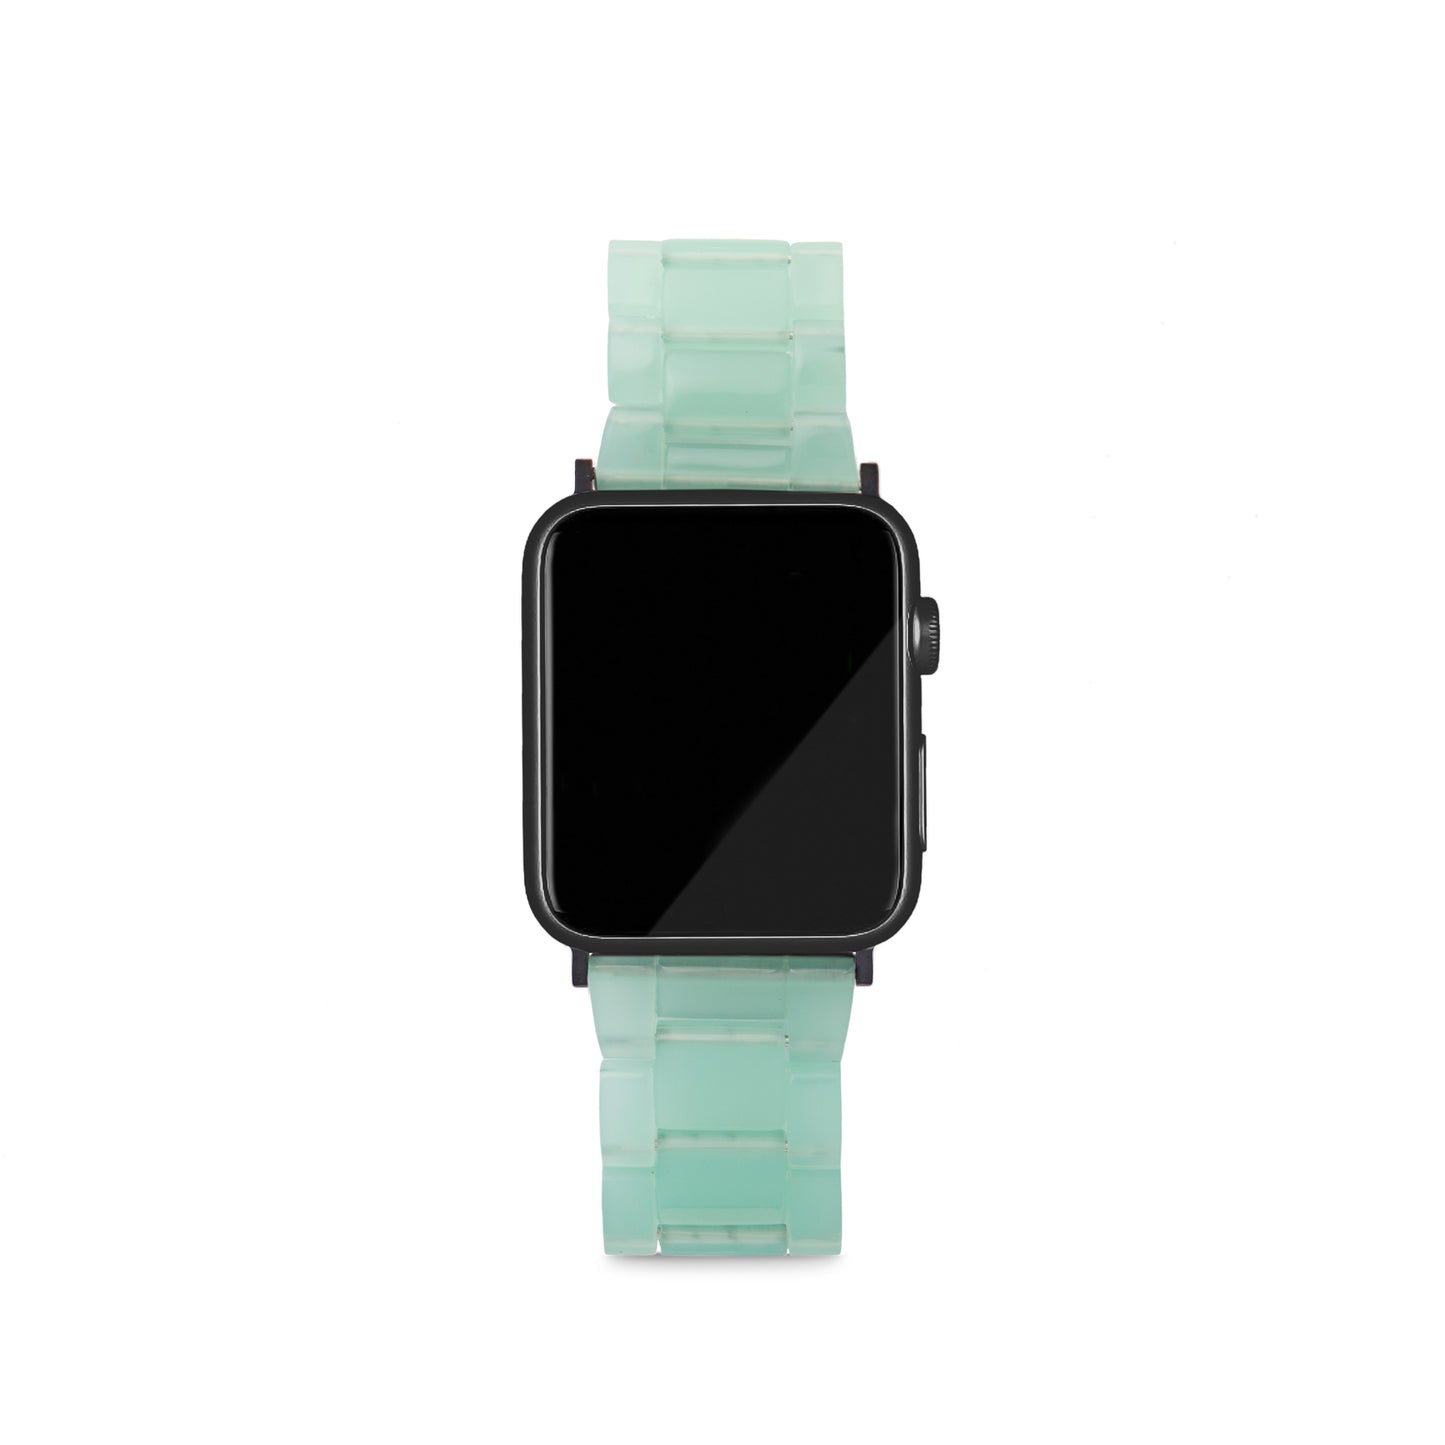 MACHETE Apple Watch Band in Sea Glass Outlet